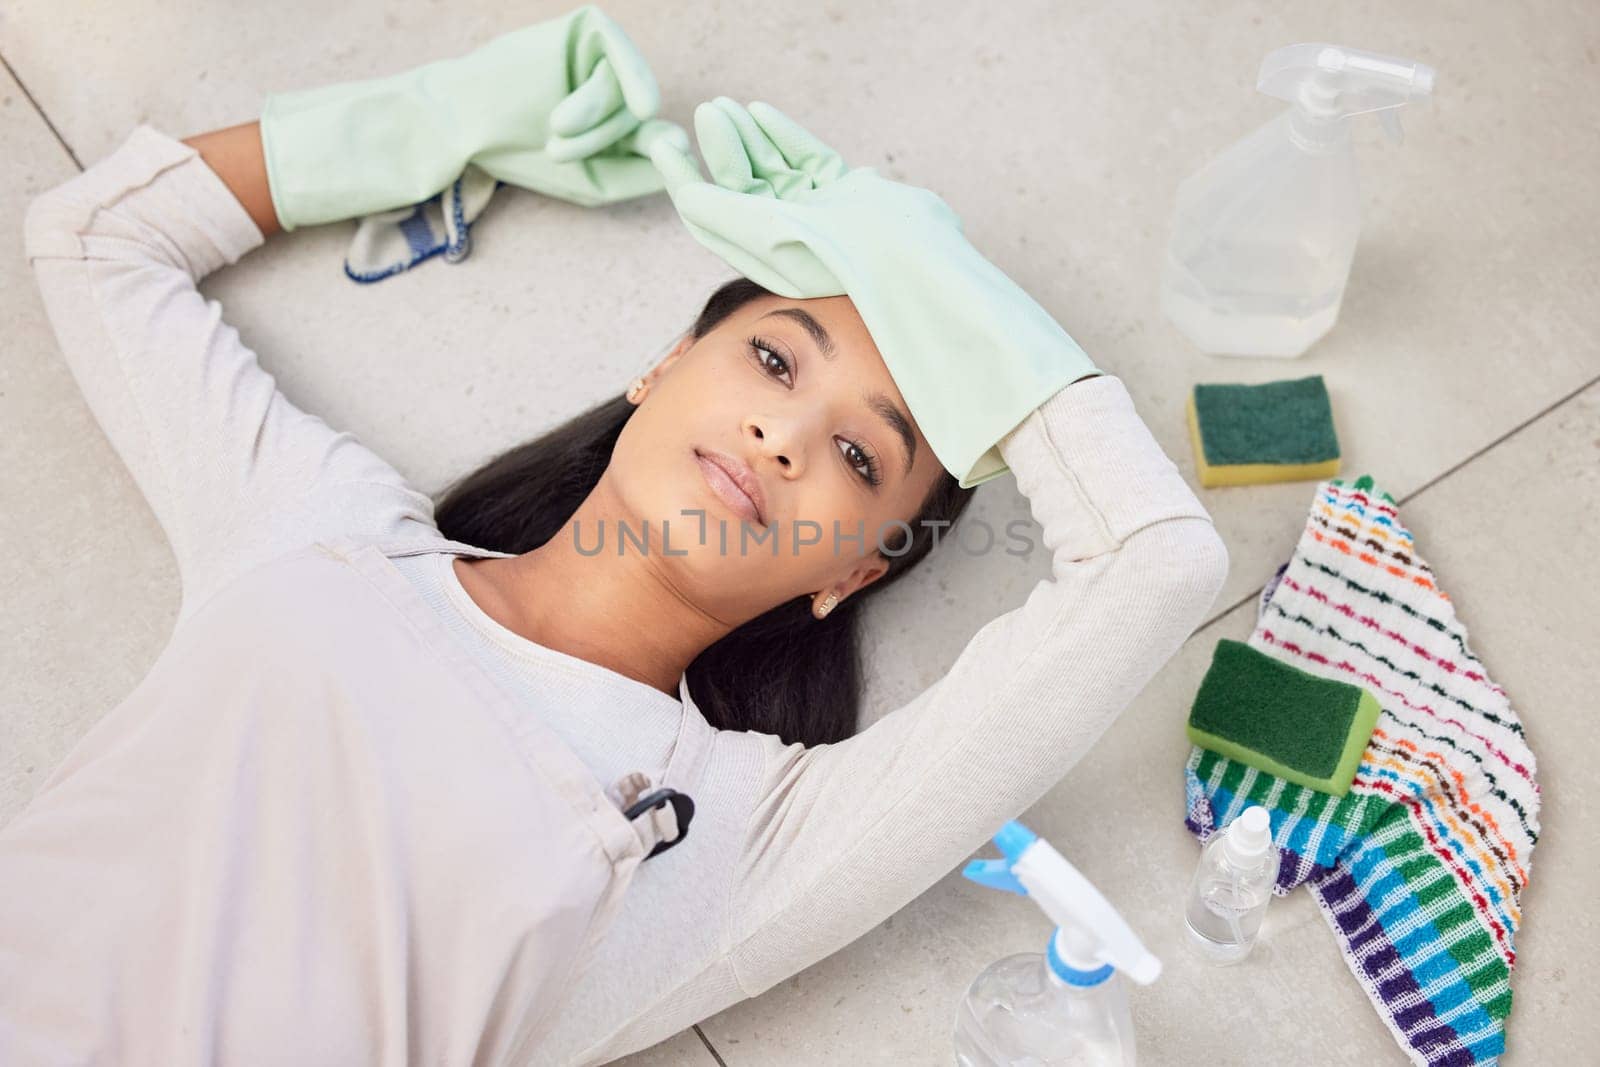 Cleaning, portrait and woman in home with above for fatigue and relaxing for housework, tired and frustrated. Girl, ground and bored with supplies for housekeeping, burnout and exhausted for working